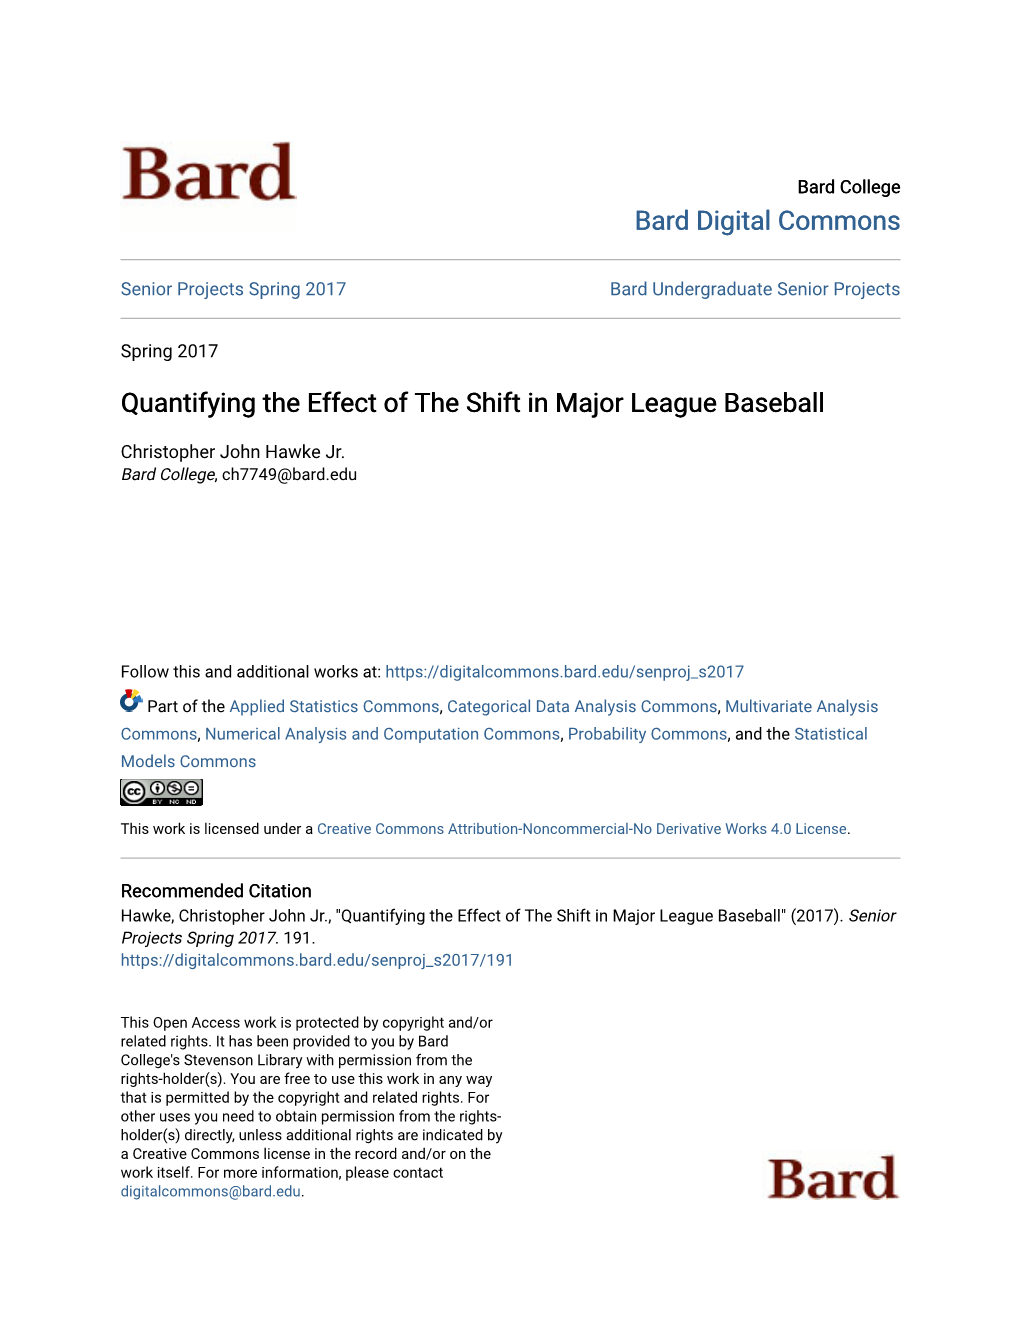 Quantifying the Effect of the Shift in Major League Baseball